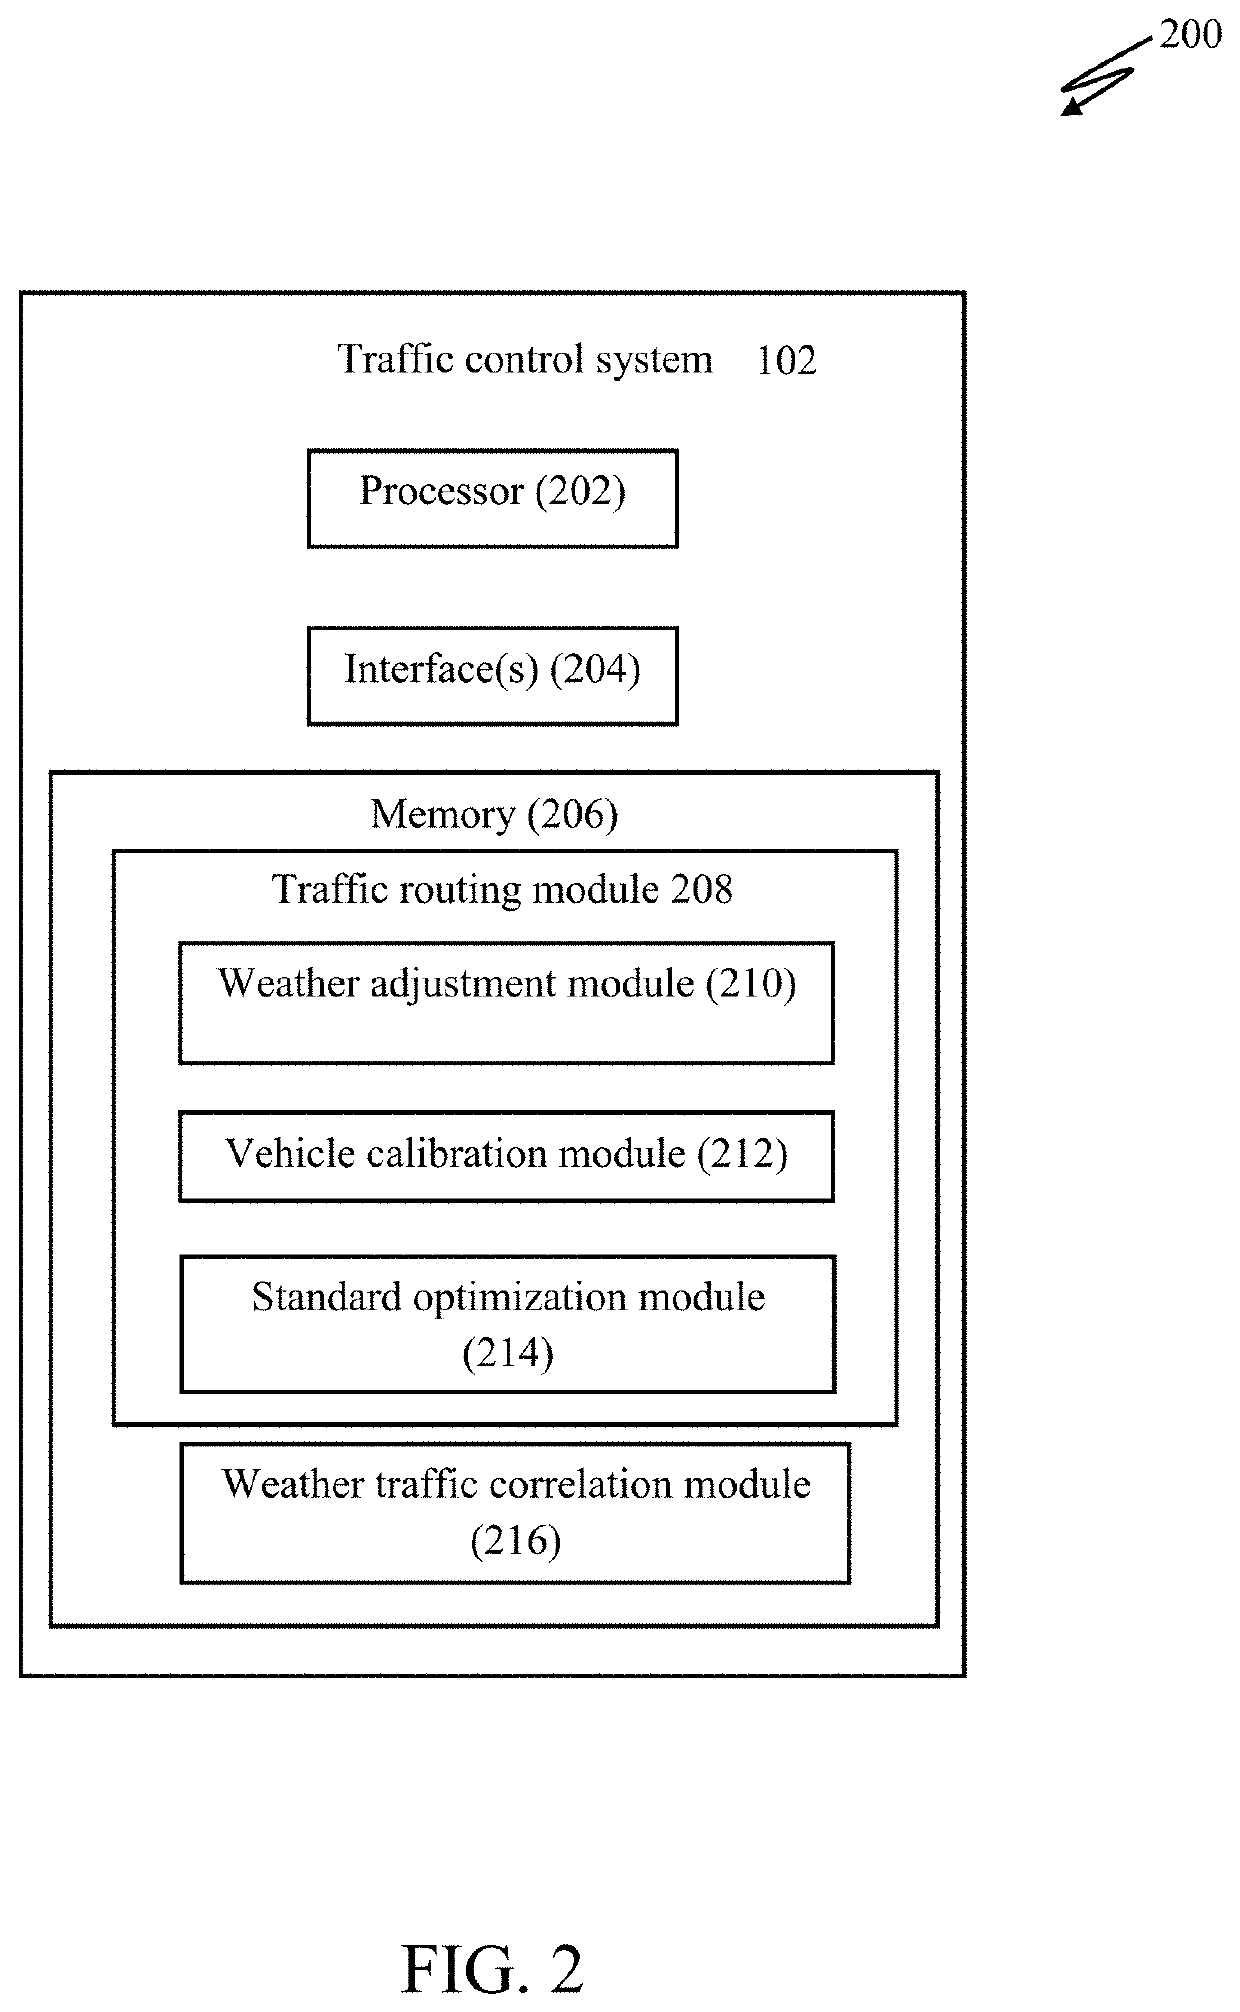 Adaptive traffic control based on weather conditions